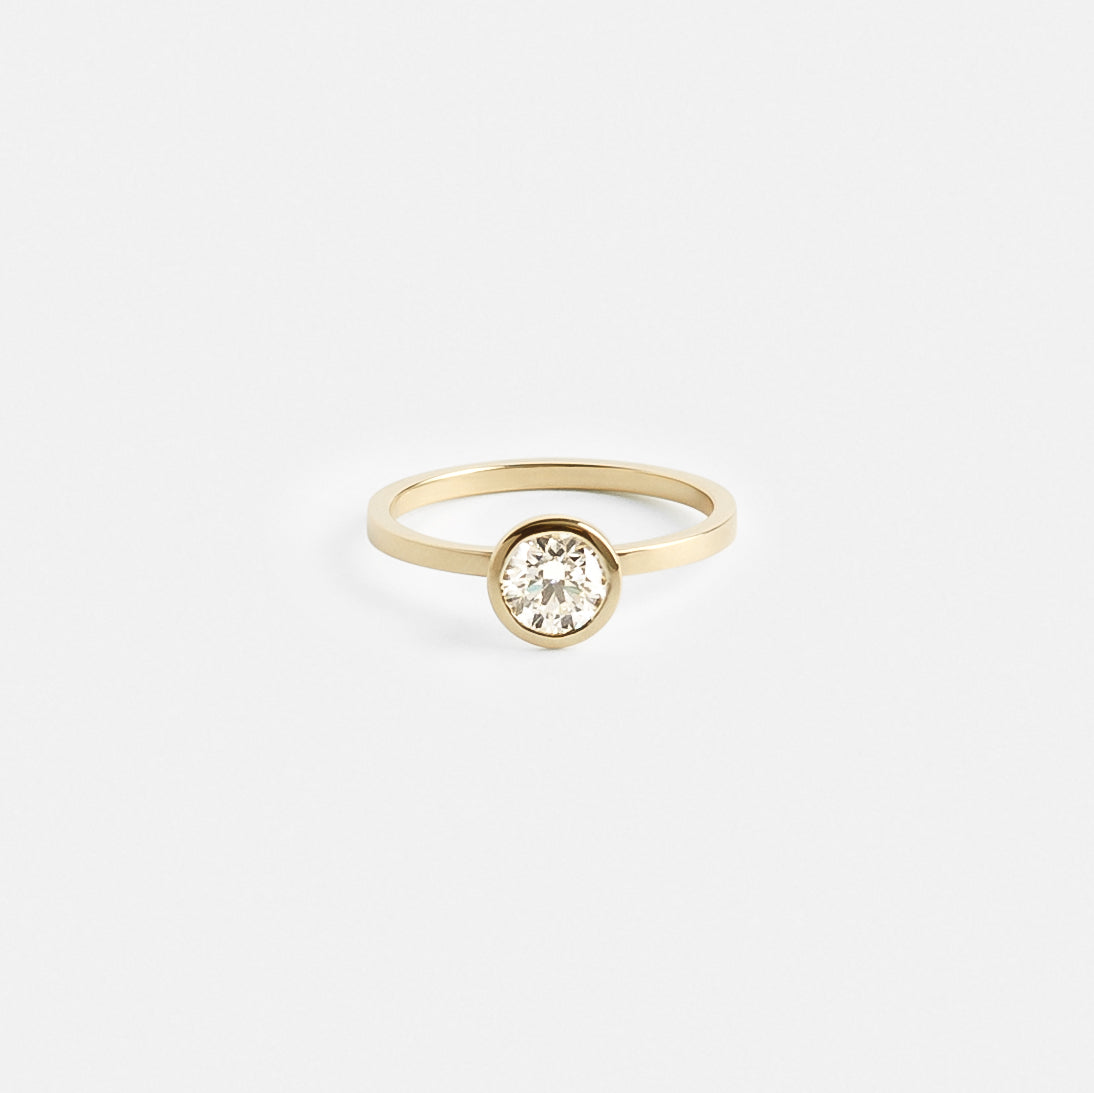 Mana Cool Ring in 14k Gold set with a 0.8ct round brilliant cut natural diamond By SHW Fine Jewelry NYC